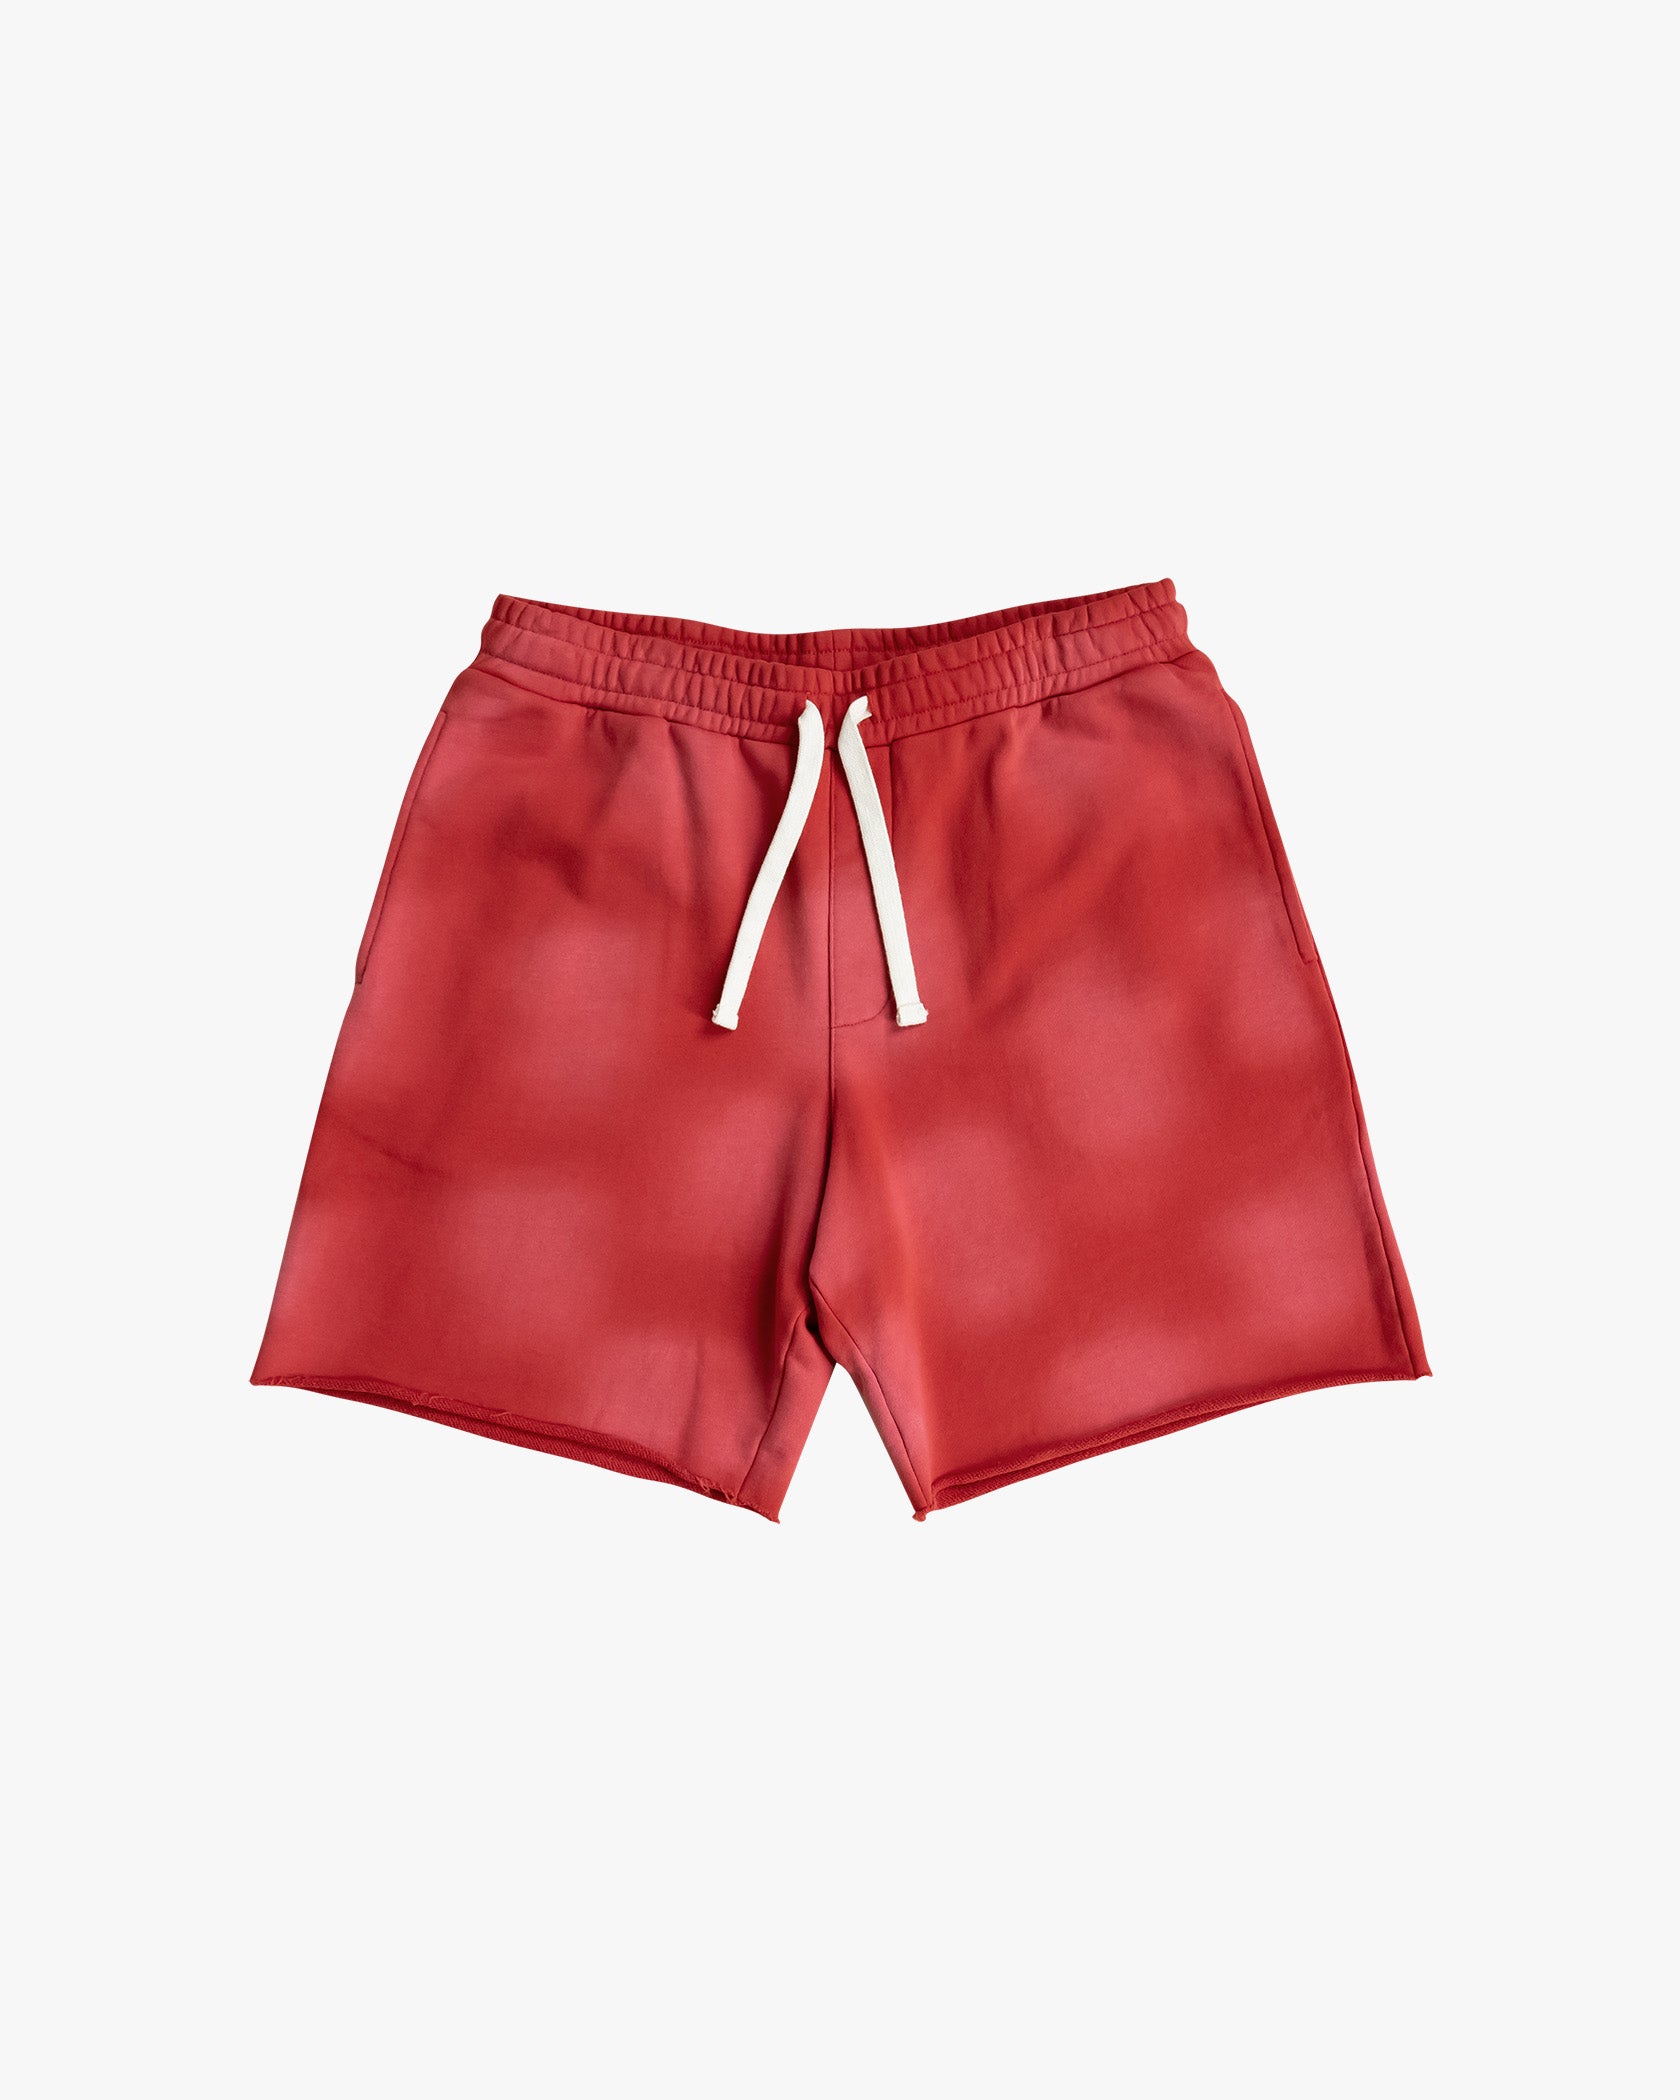 EPTM BIG N TALL SUN FADED SHORTS - RED – EPTM.